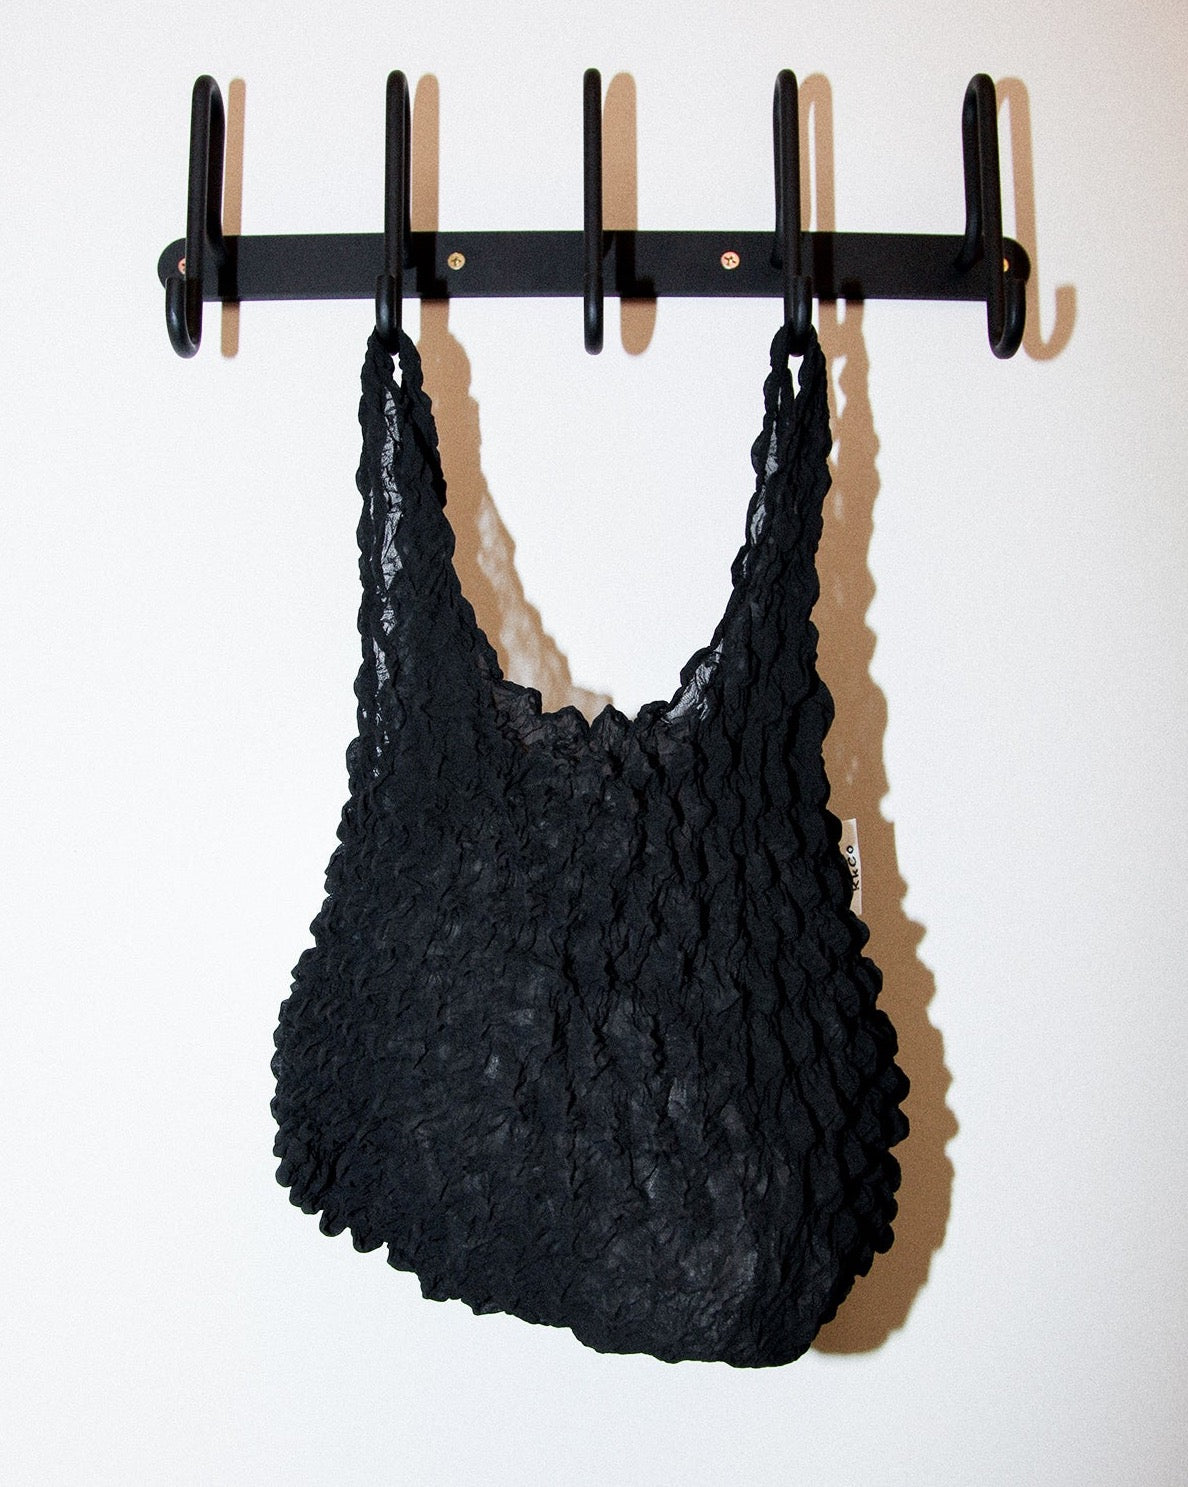 small handbag in a black popcorn pleated fabric from Kkco hanging from a wall mount coat rack